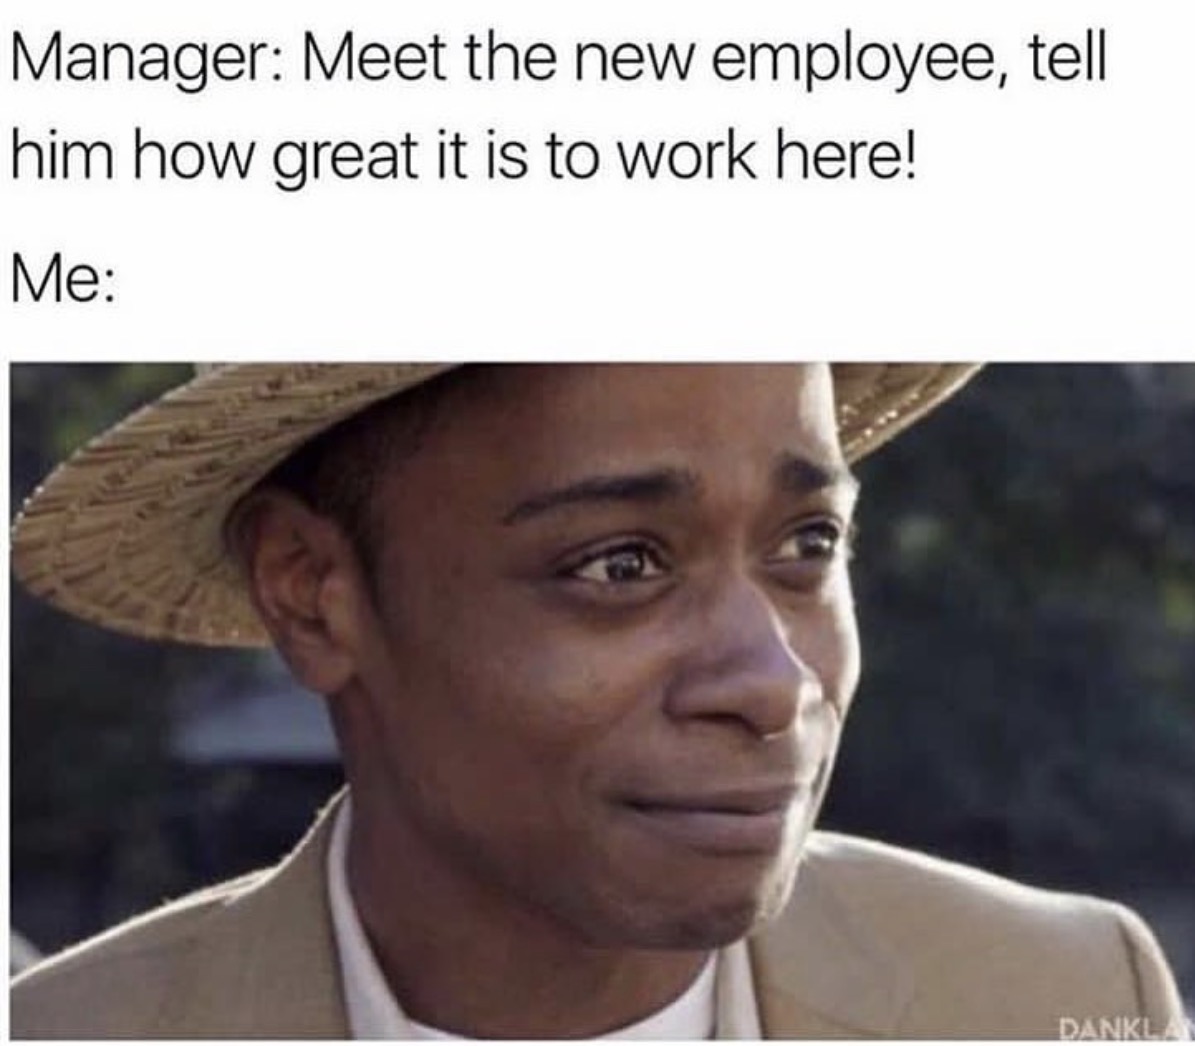 Dave Chappelle meme about telling new employee how great the job is.